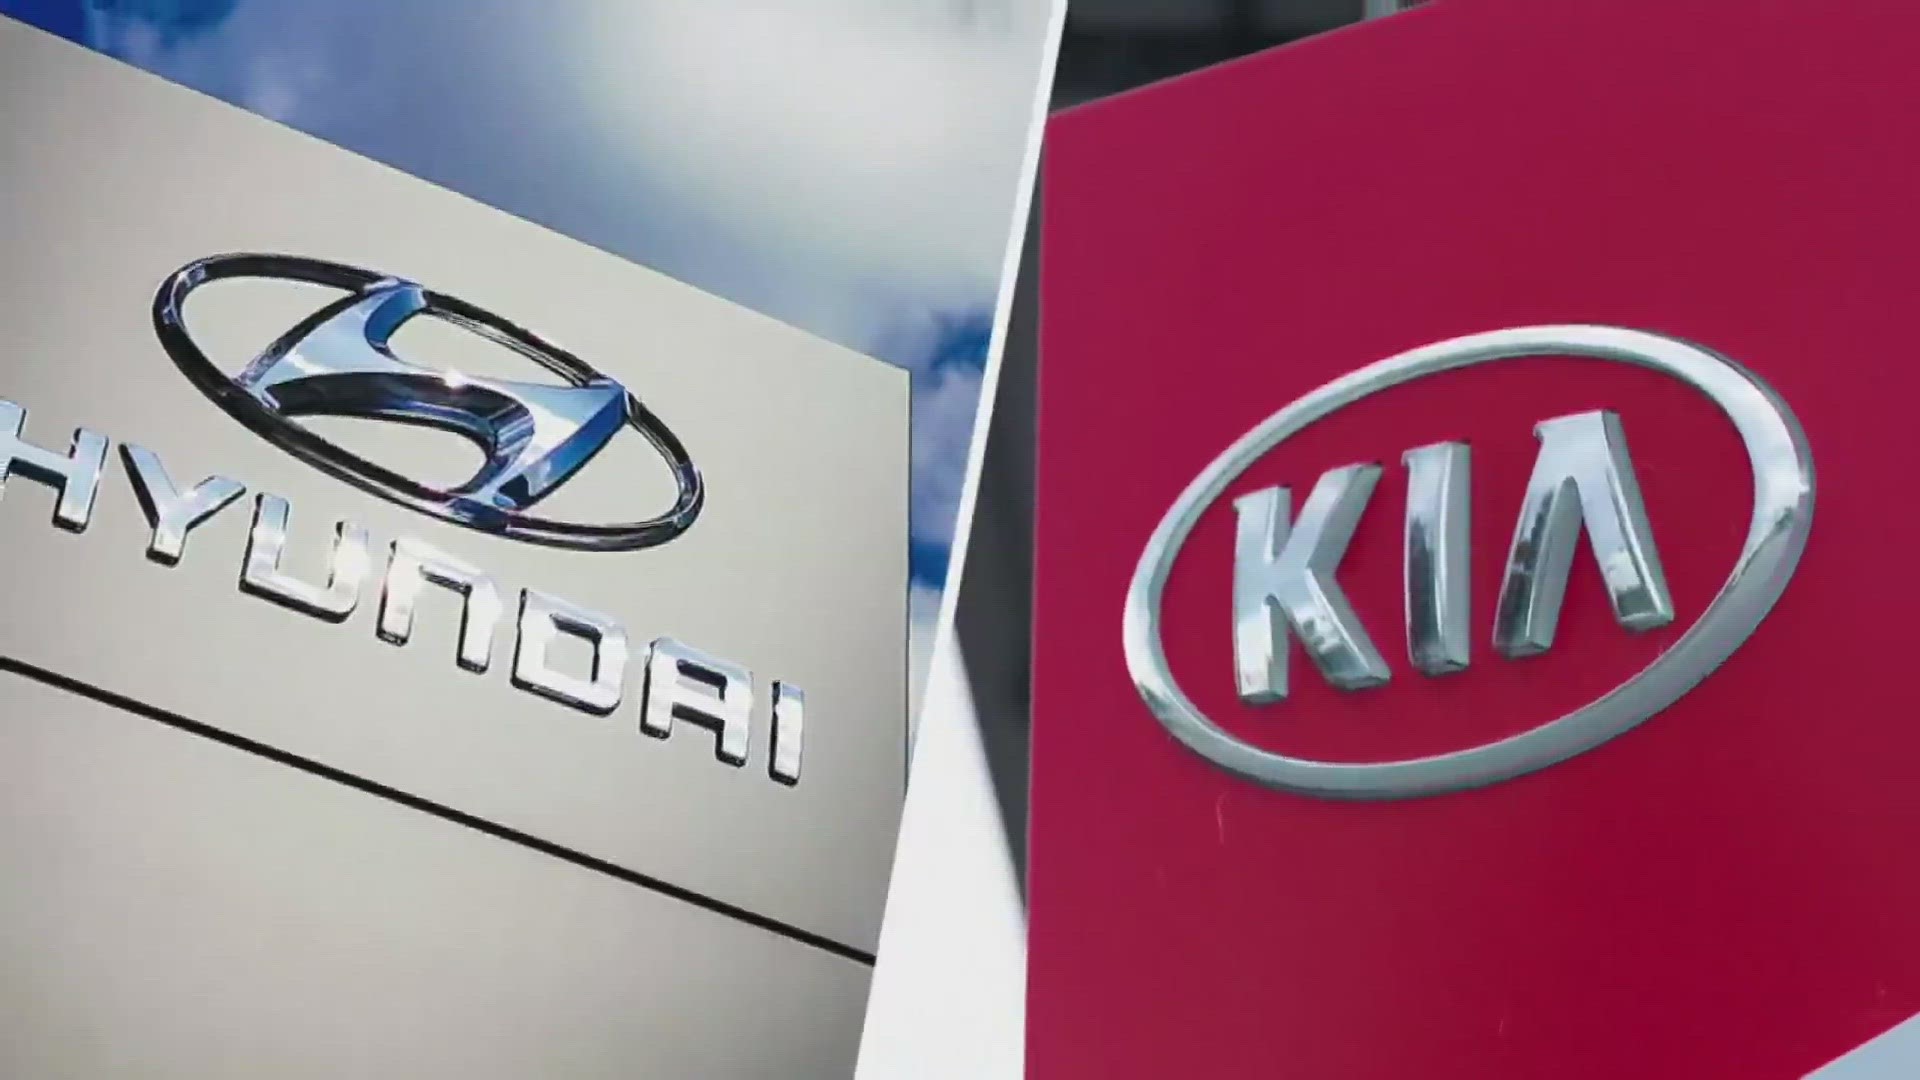 California Attorney General Rob Bonta join calls for Kia and Hyundai to address a crisis of car thefts.